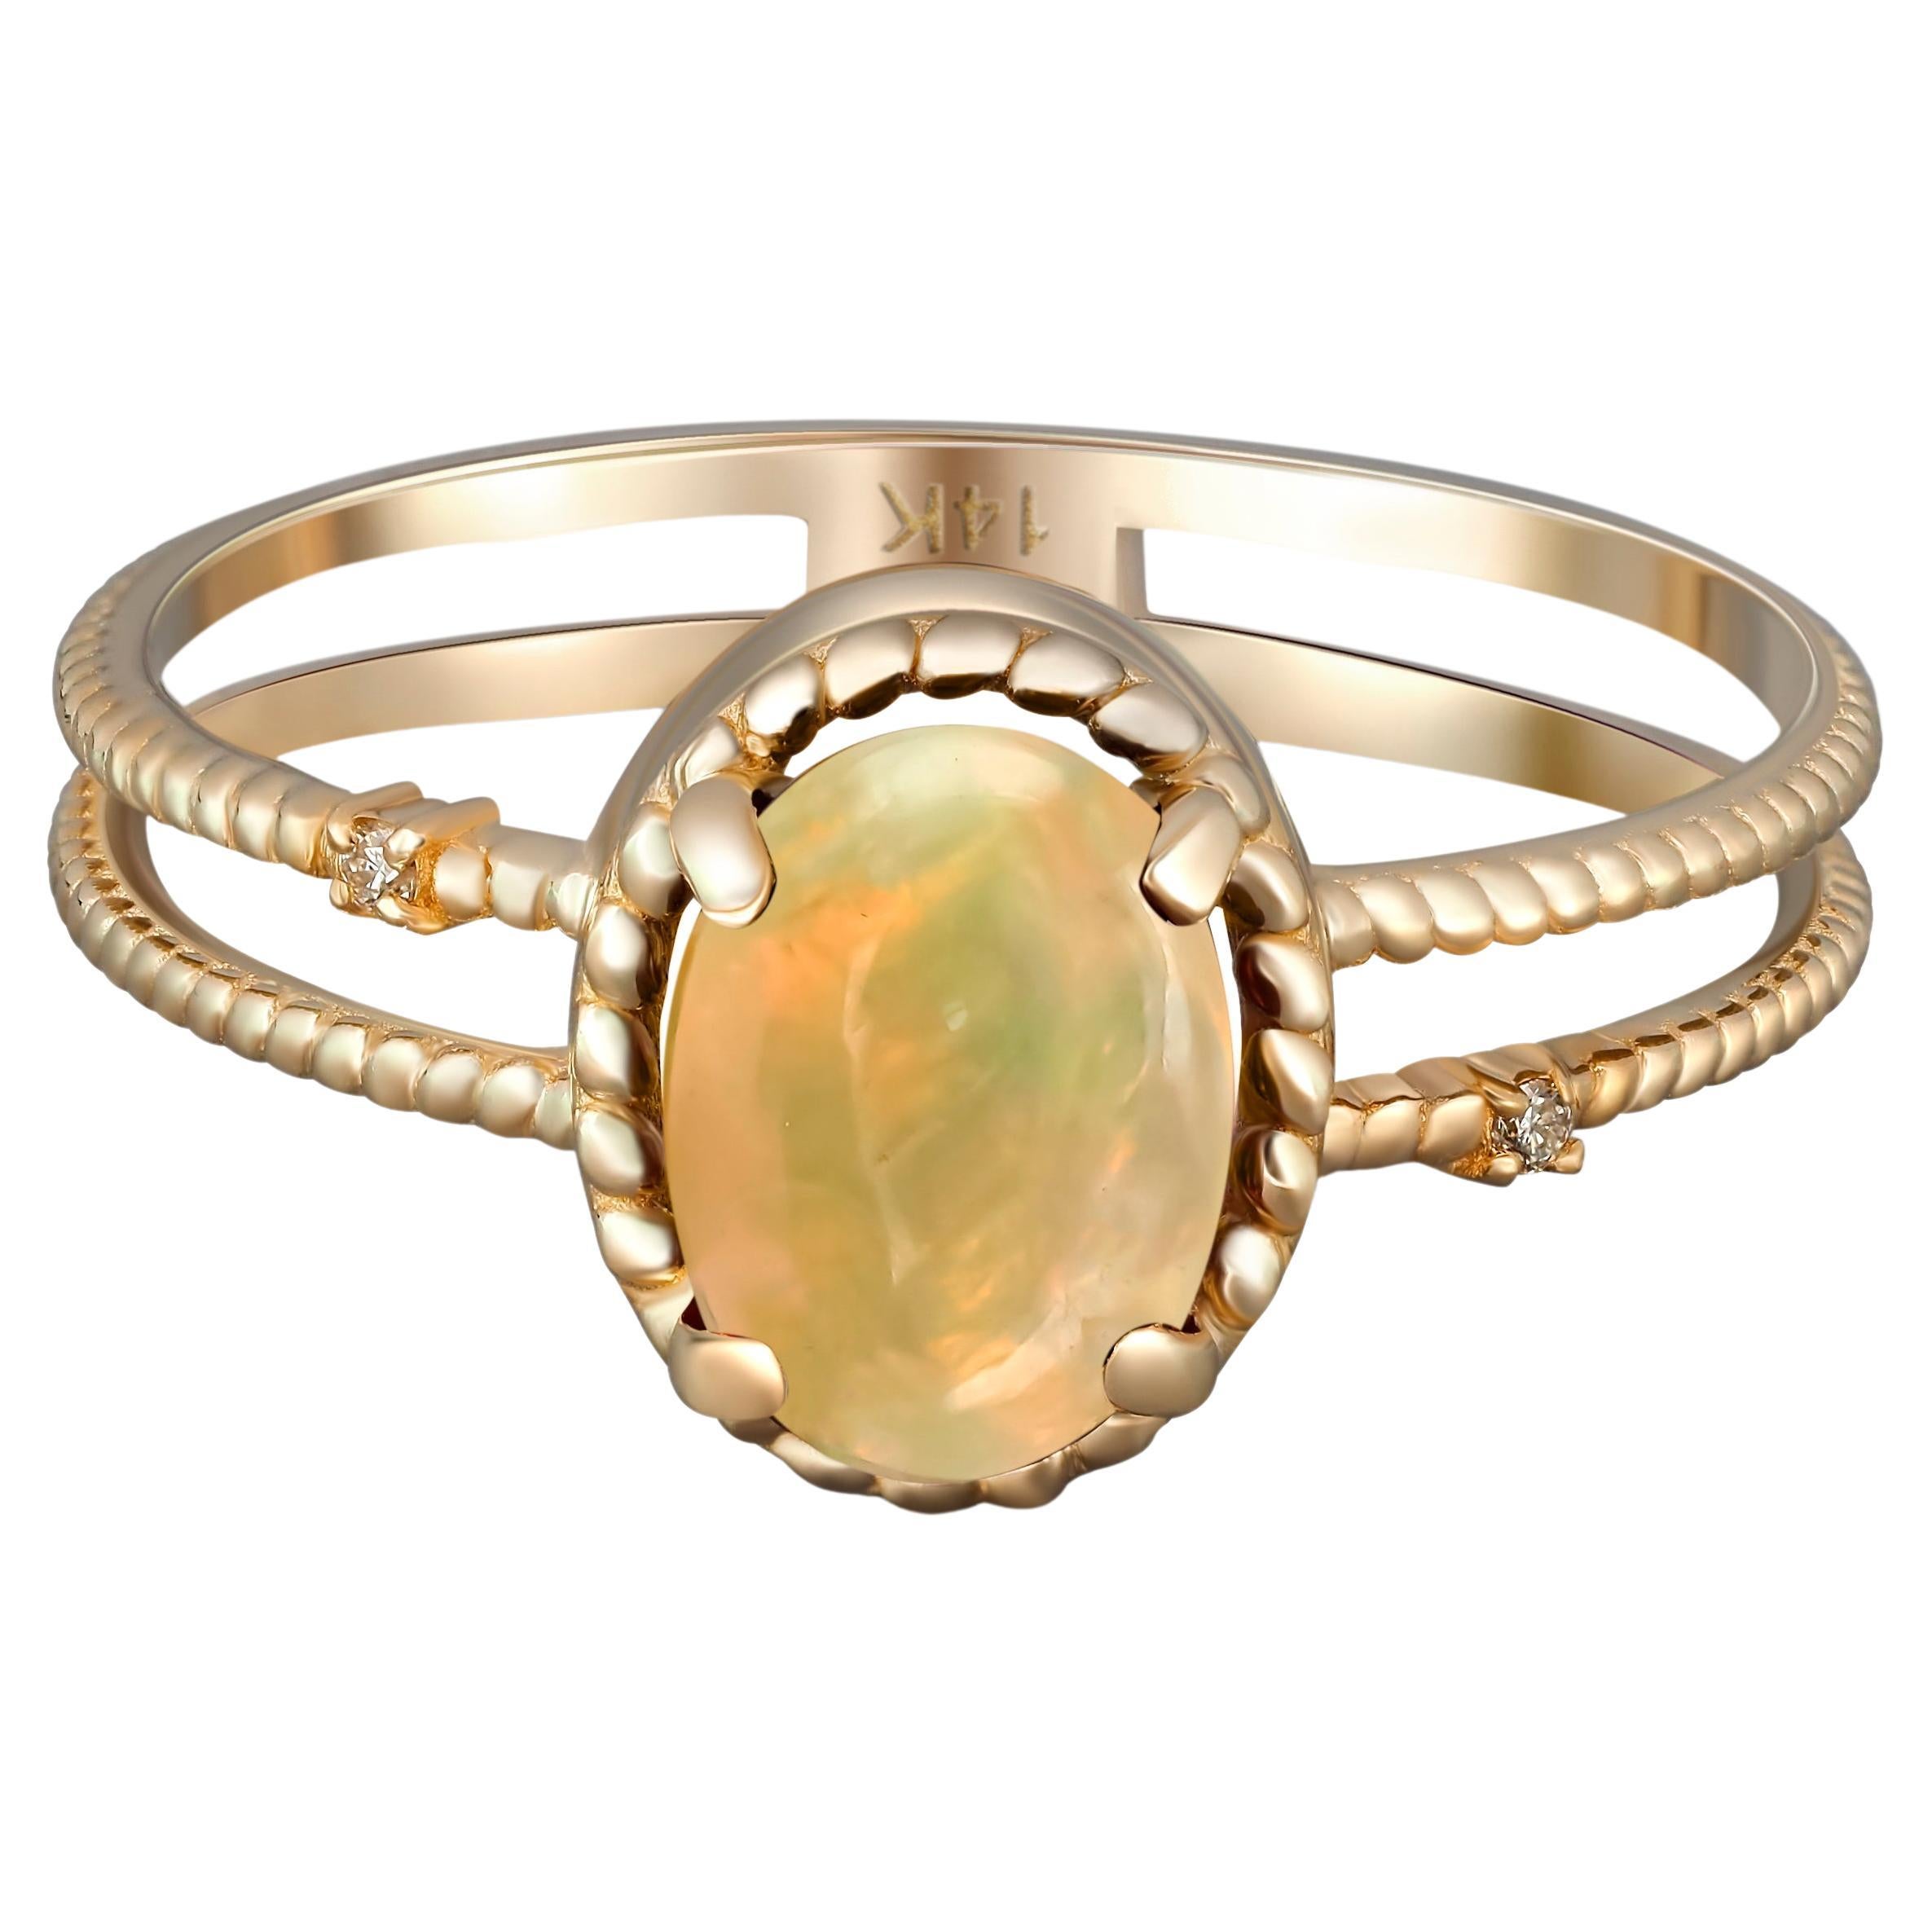 Cabochon Opal Ring, 14k Gold Ring with Opal, Minimalist Opal Ring For Sale